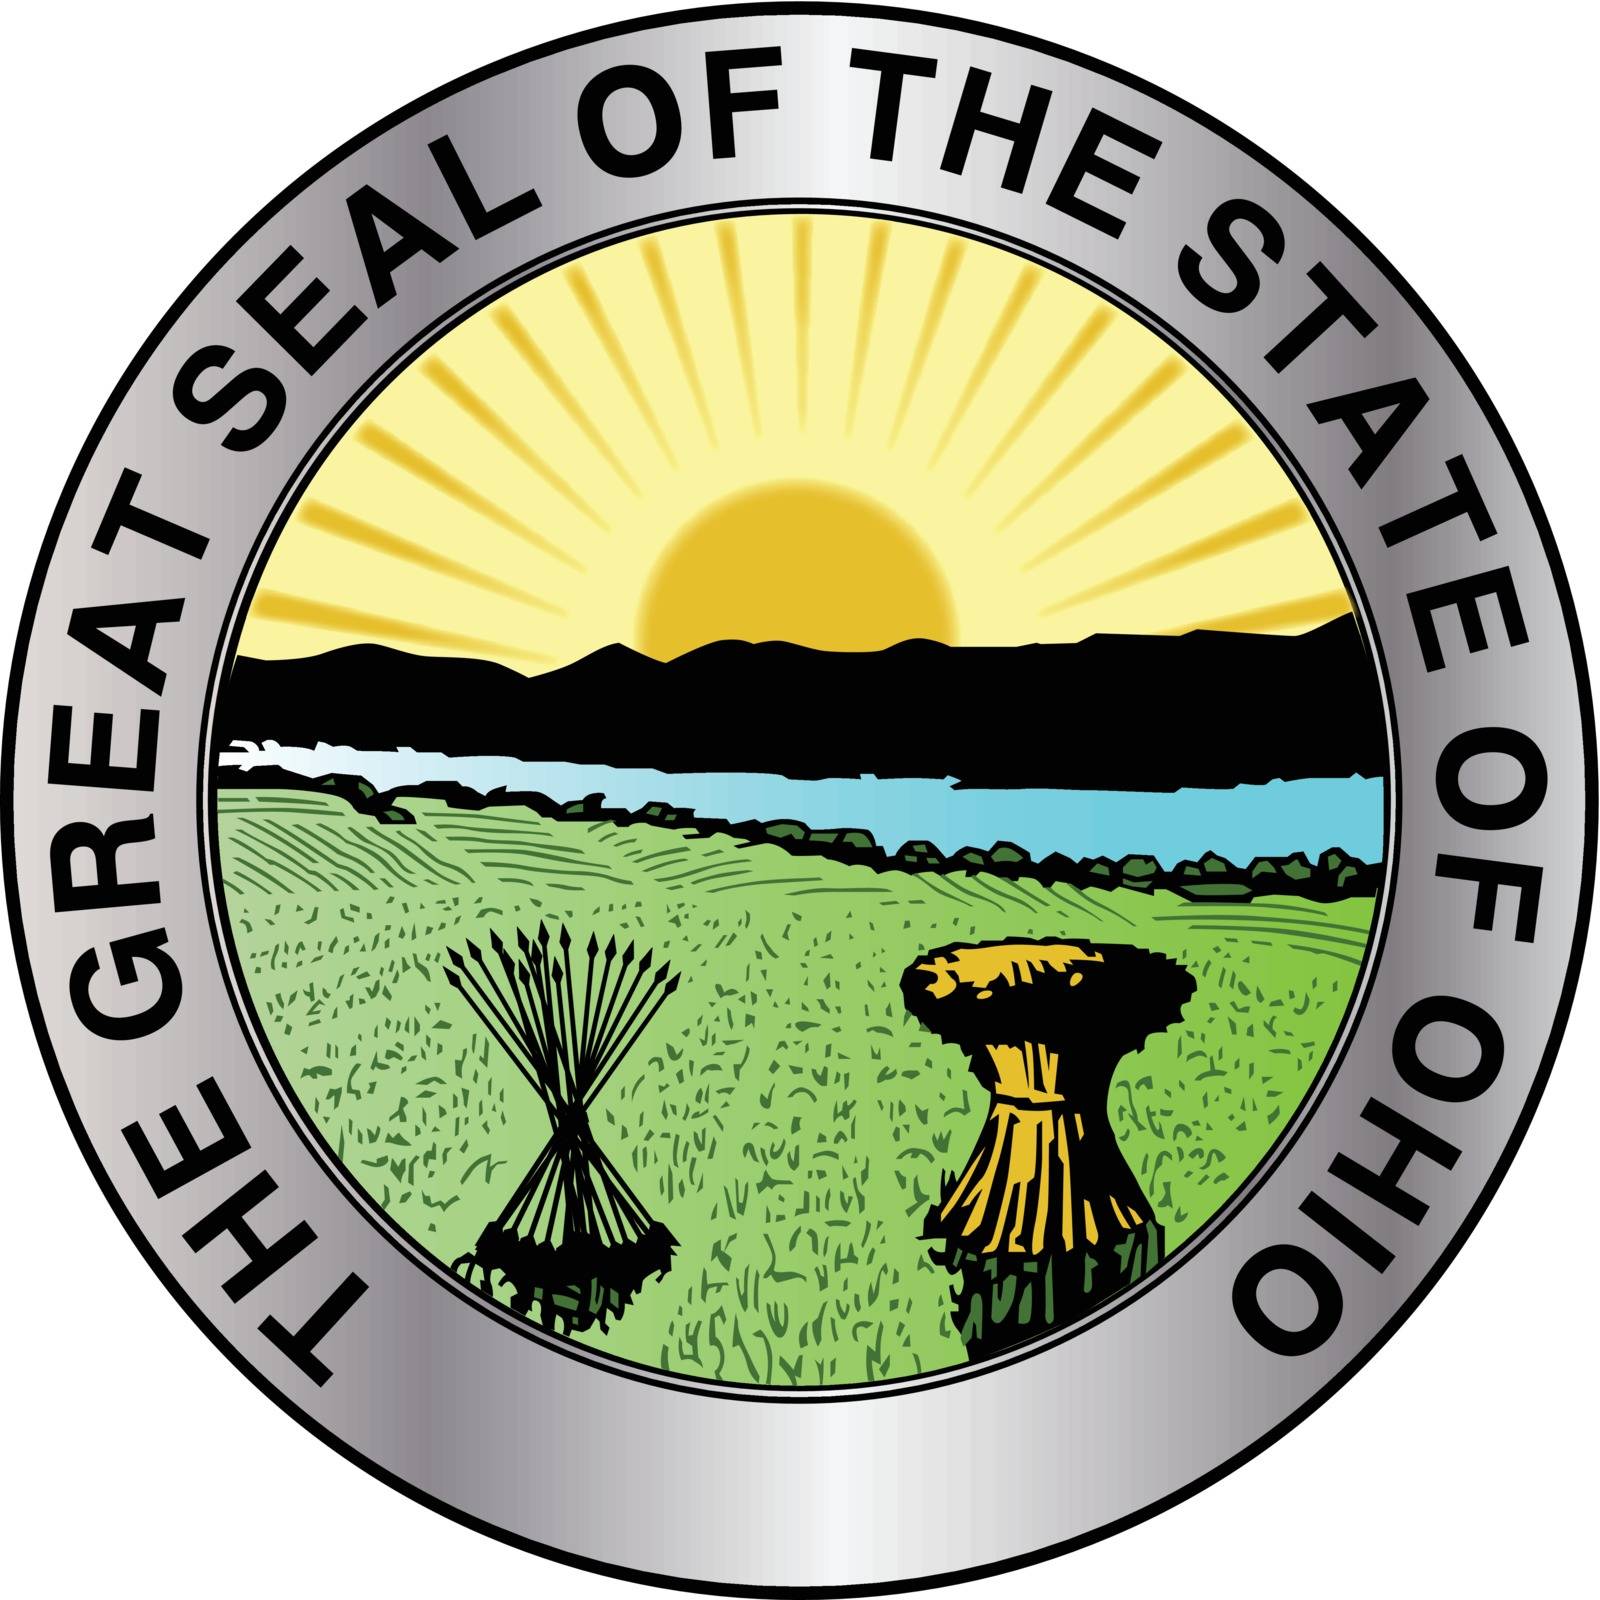 The great seal of the state of Ohio